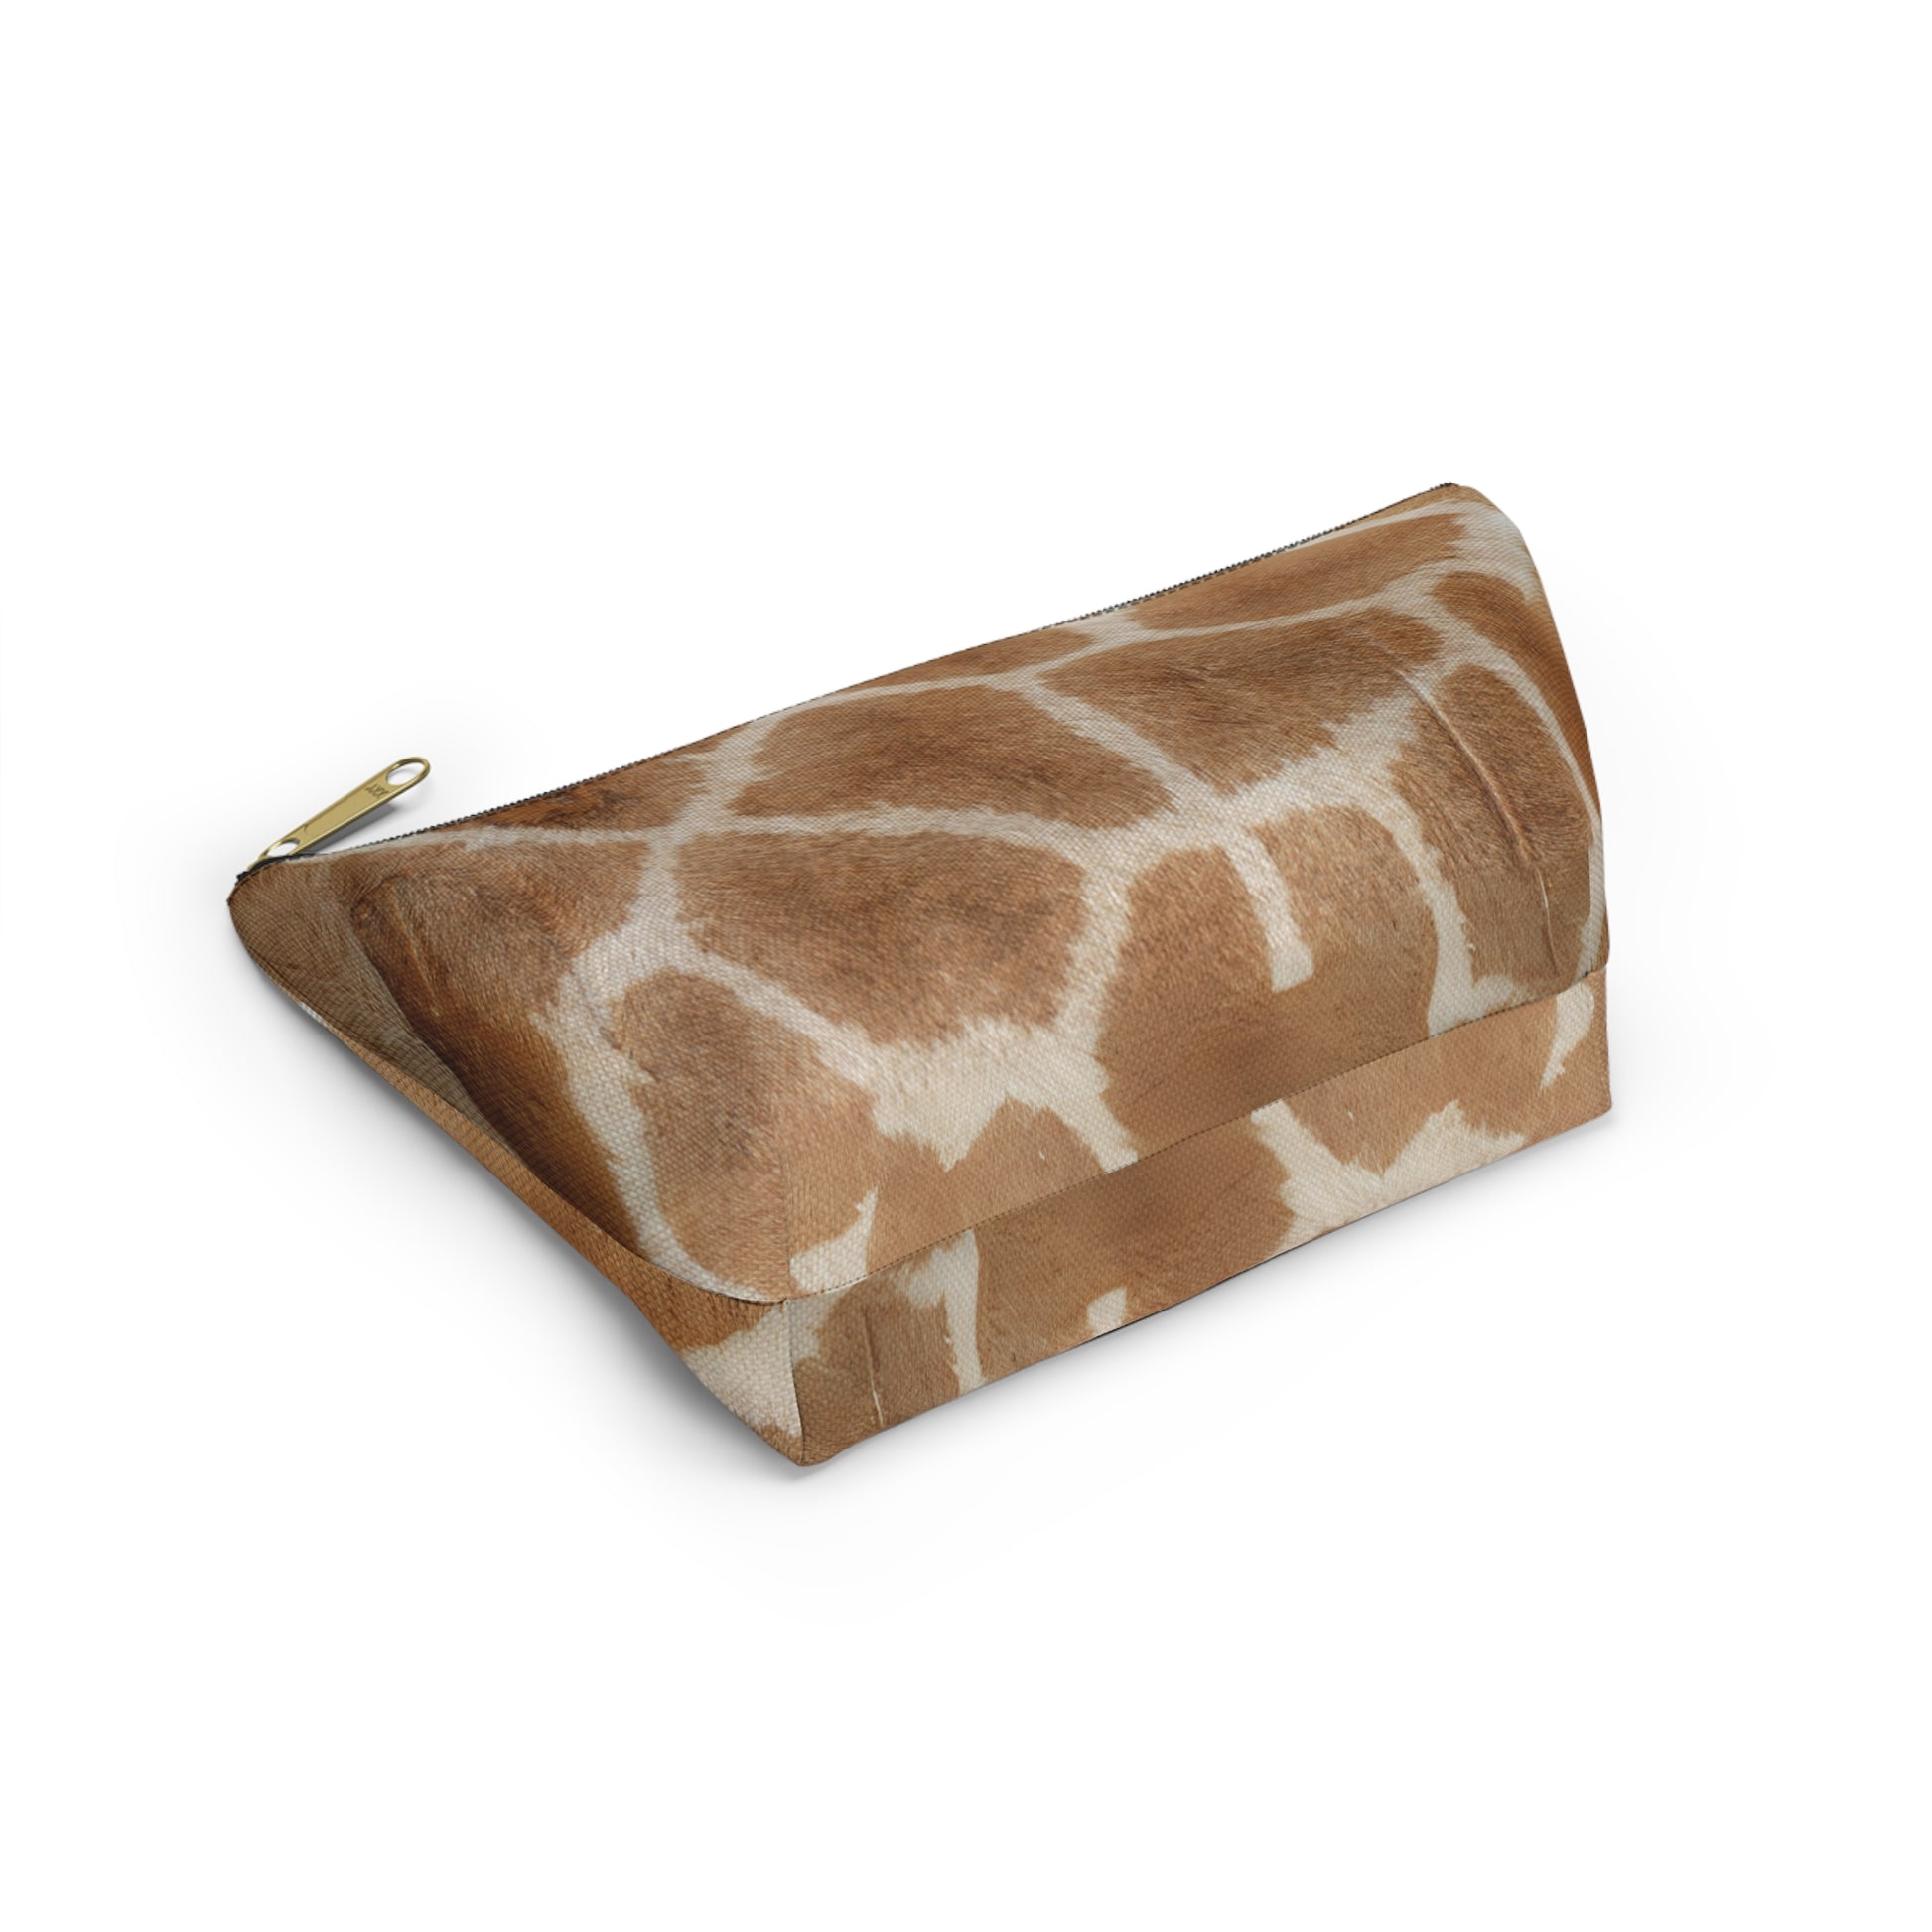 Everyday bag with T-bottom, perfect for accessories, makeup, technology or travel  (Giraffe skin)